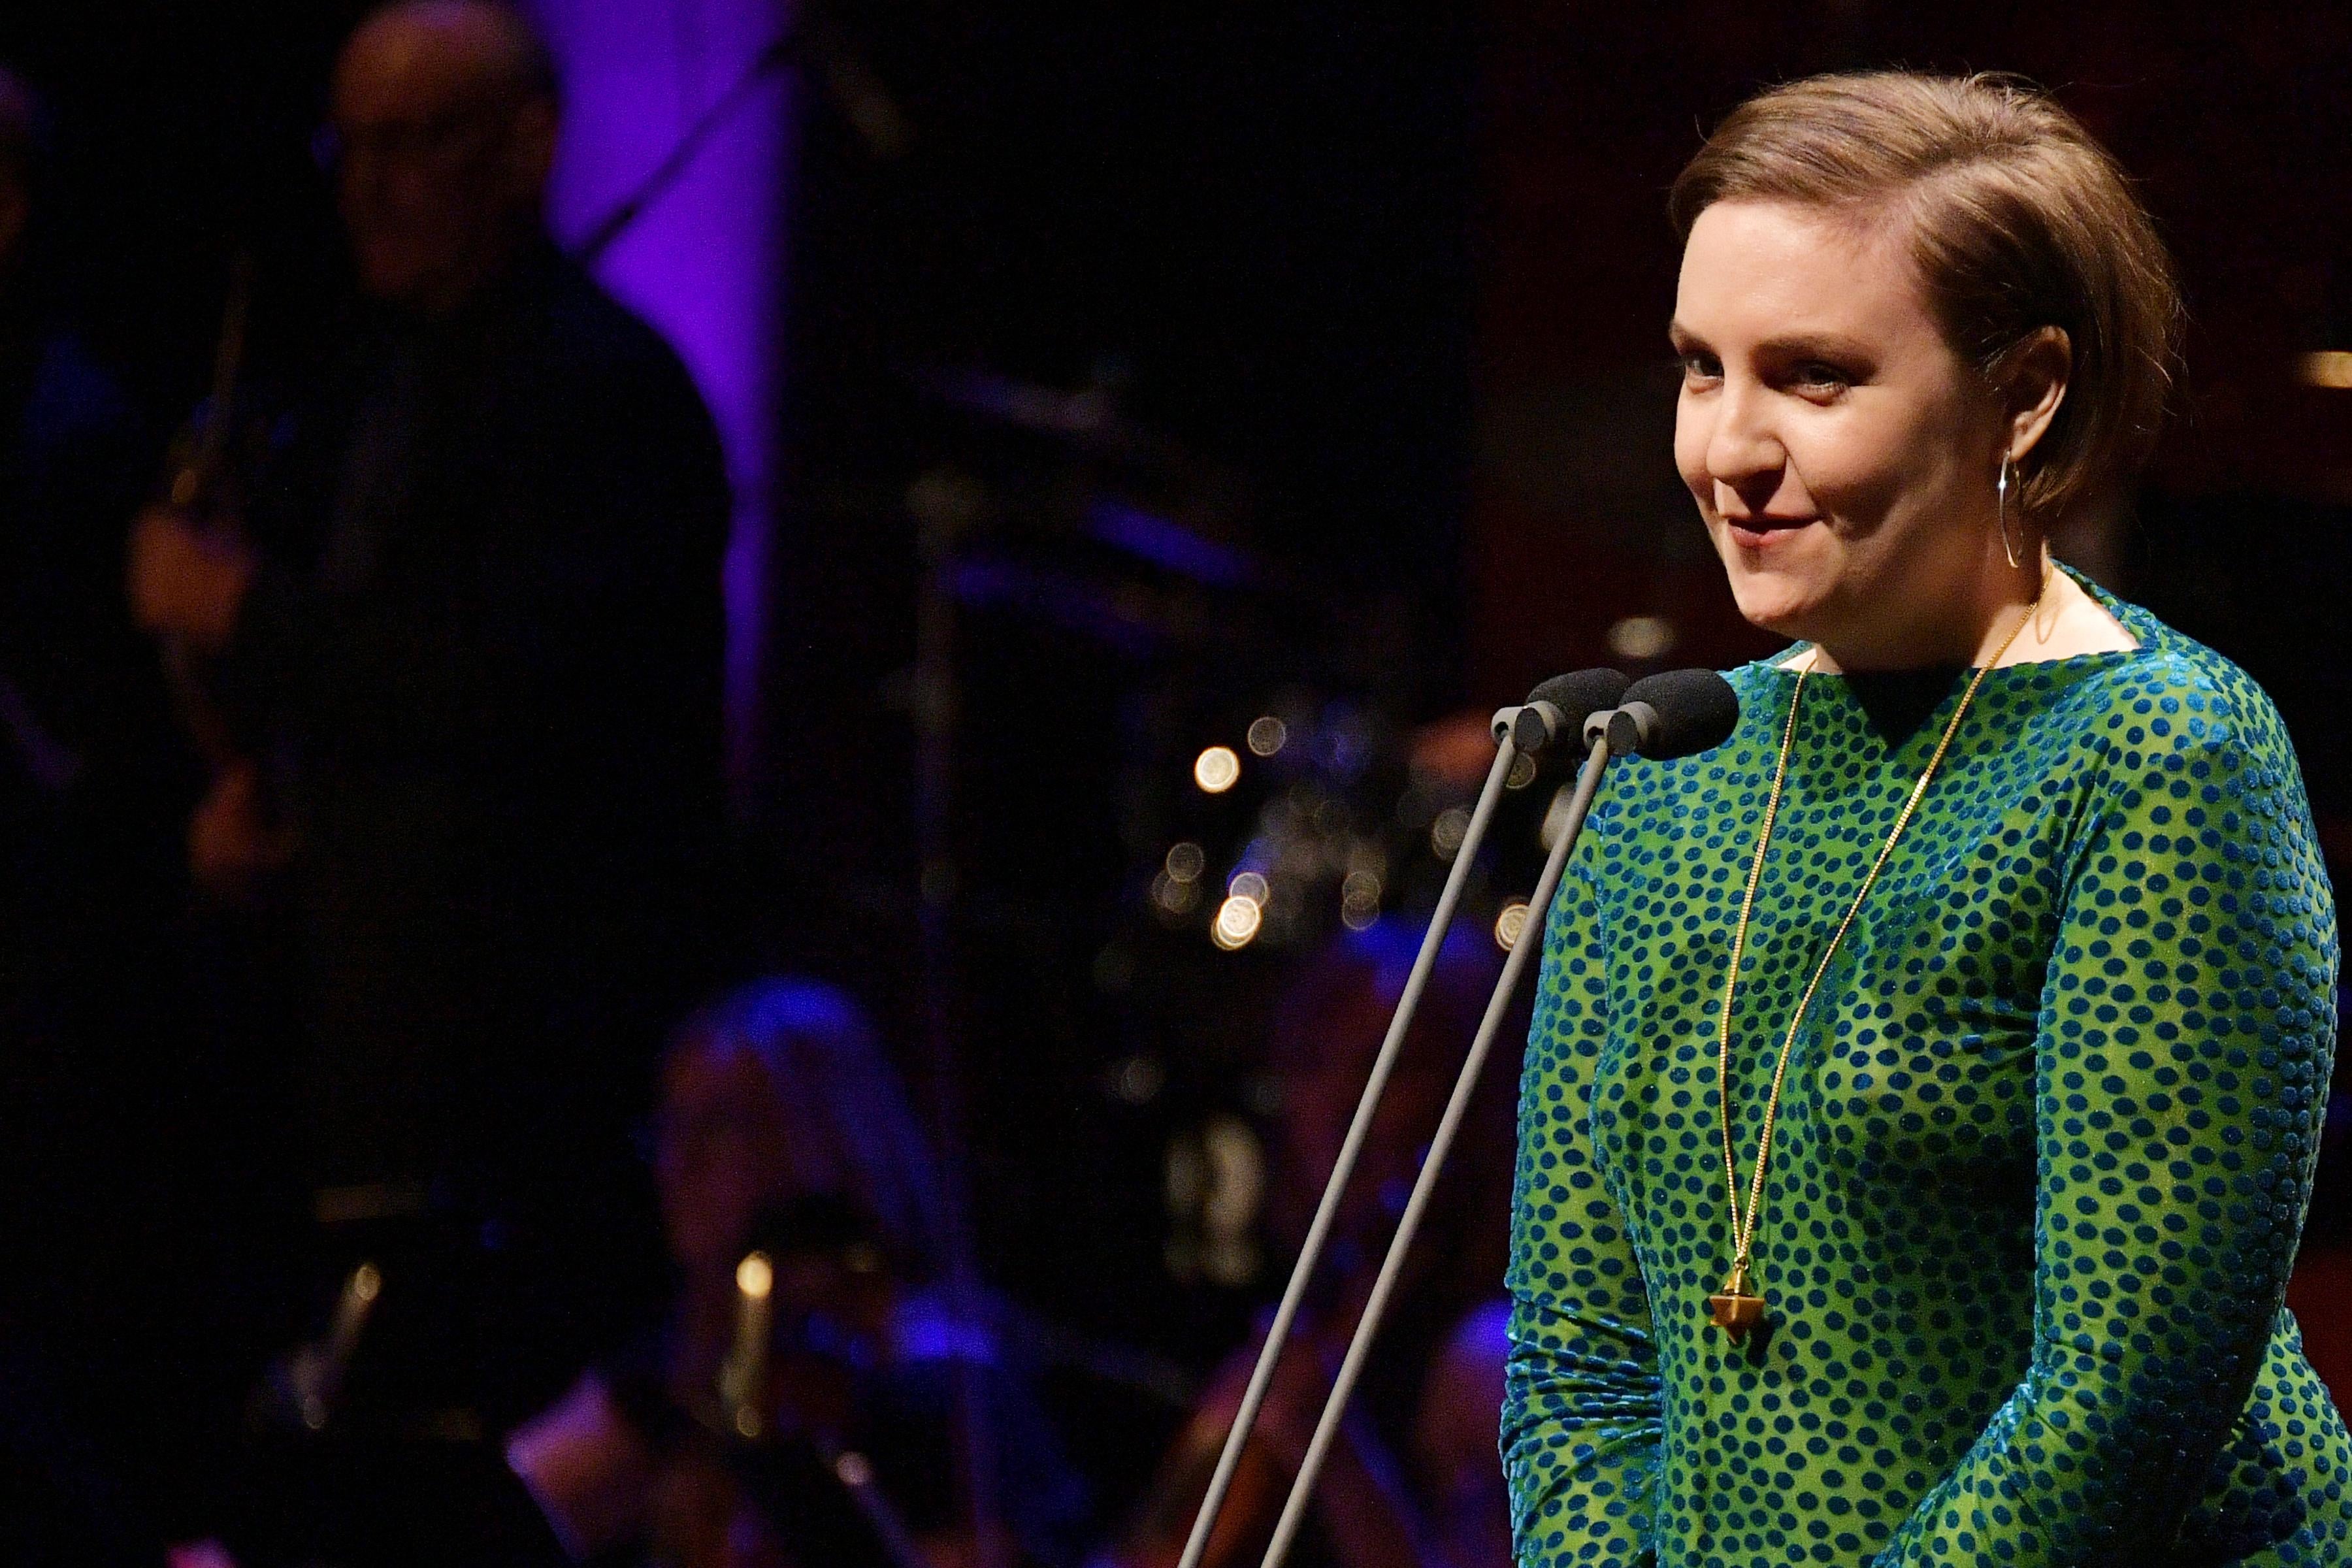 NEW YORK, NY - MAY 29:  Actress Lena Dunham speaks onstage during Lincoln Center's American Songbook Gala at Alice Tully Hall on May 29, 2018 in New York City.  (Photo by Dia Dipasupil/Getty Images for Lincoln Center)